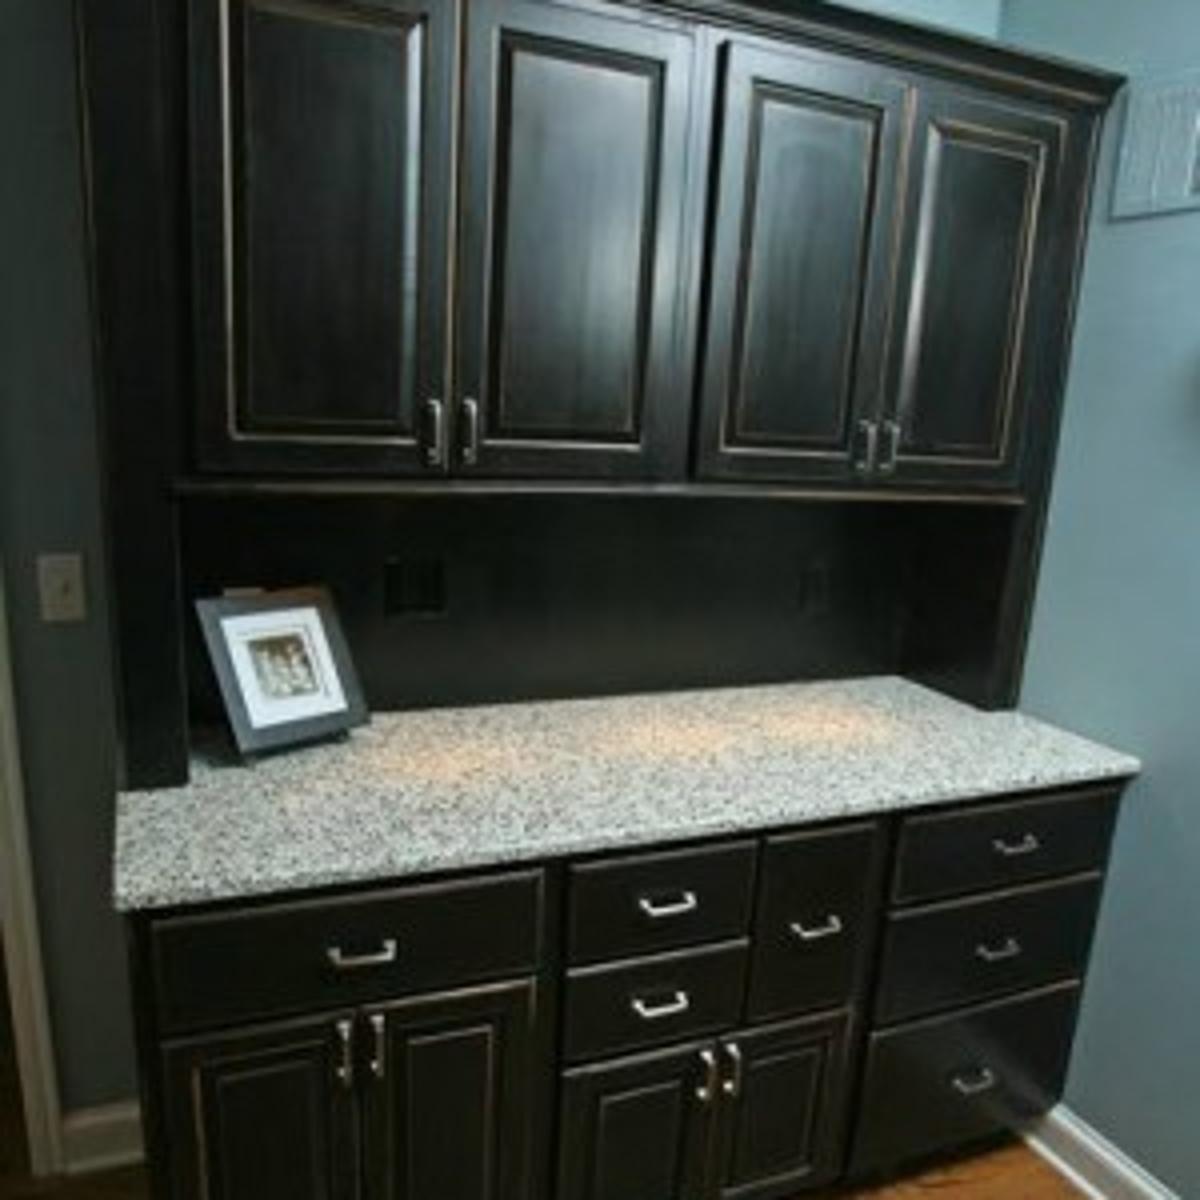 Recycled Countertops An Option When Remodeling Your Kitchen